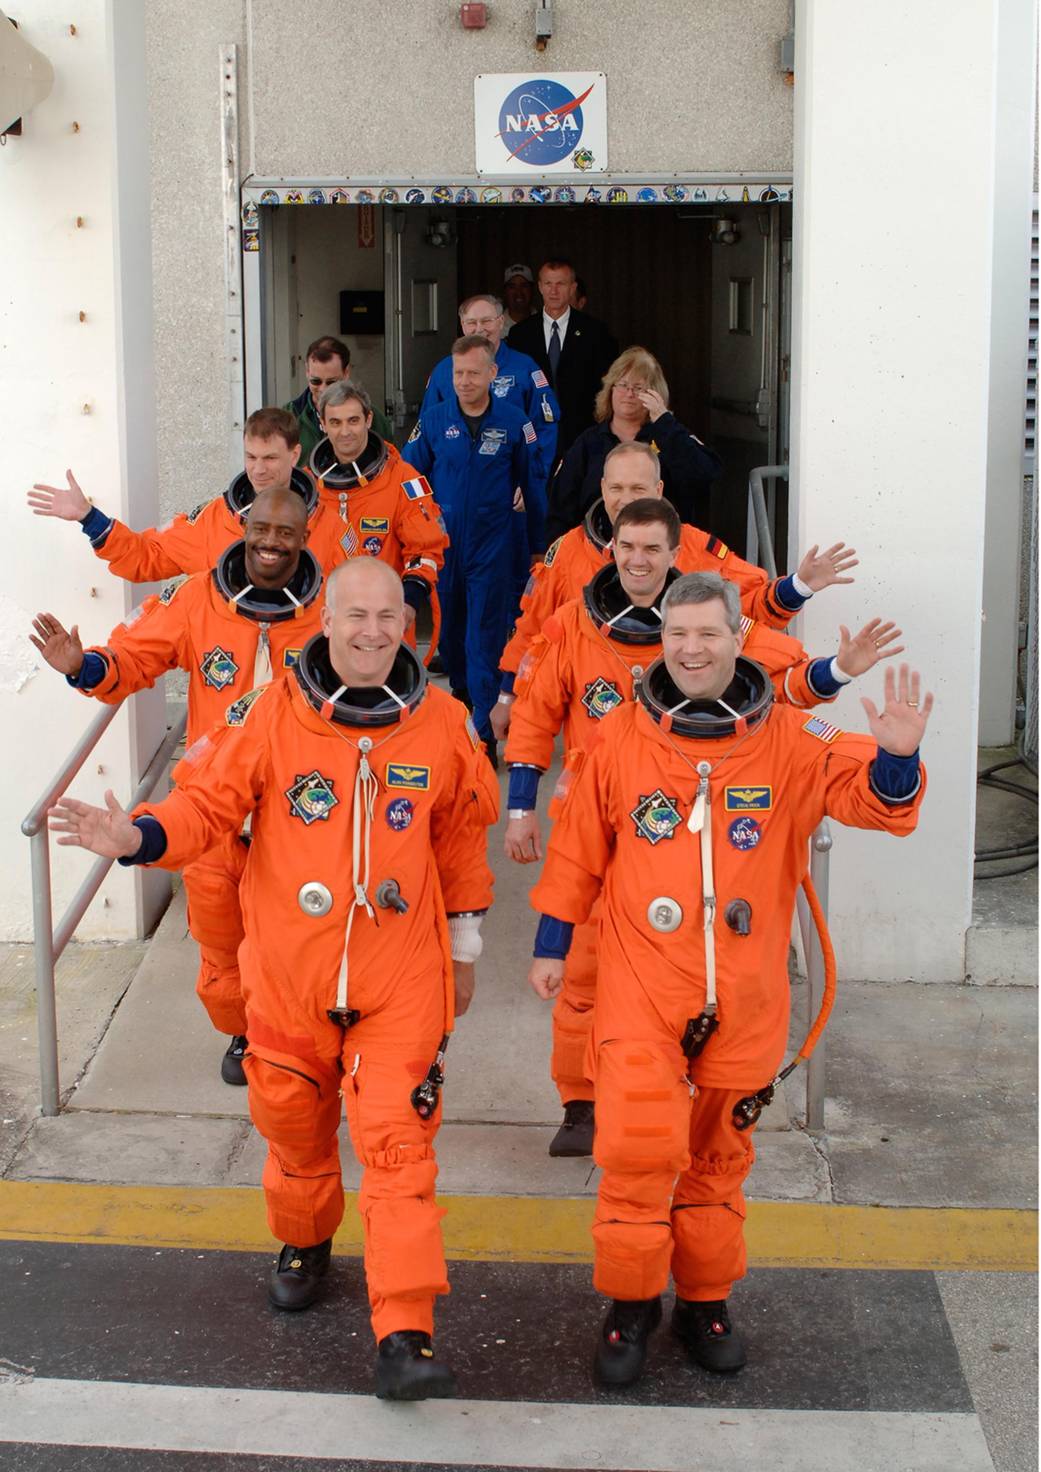 Crew members of STS-122 in orange flight suits wave as they exit the Operations and Checkout Building